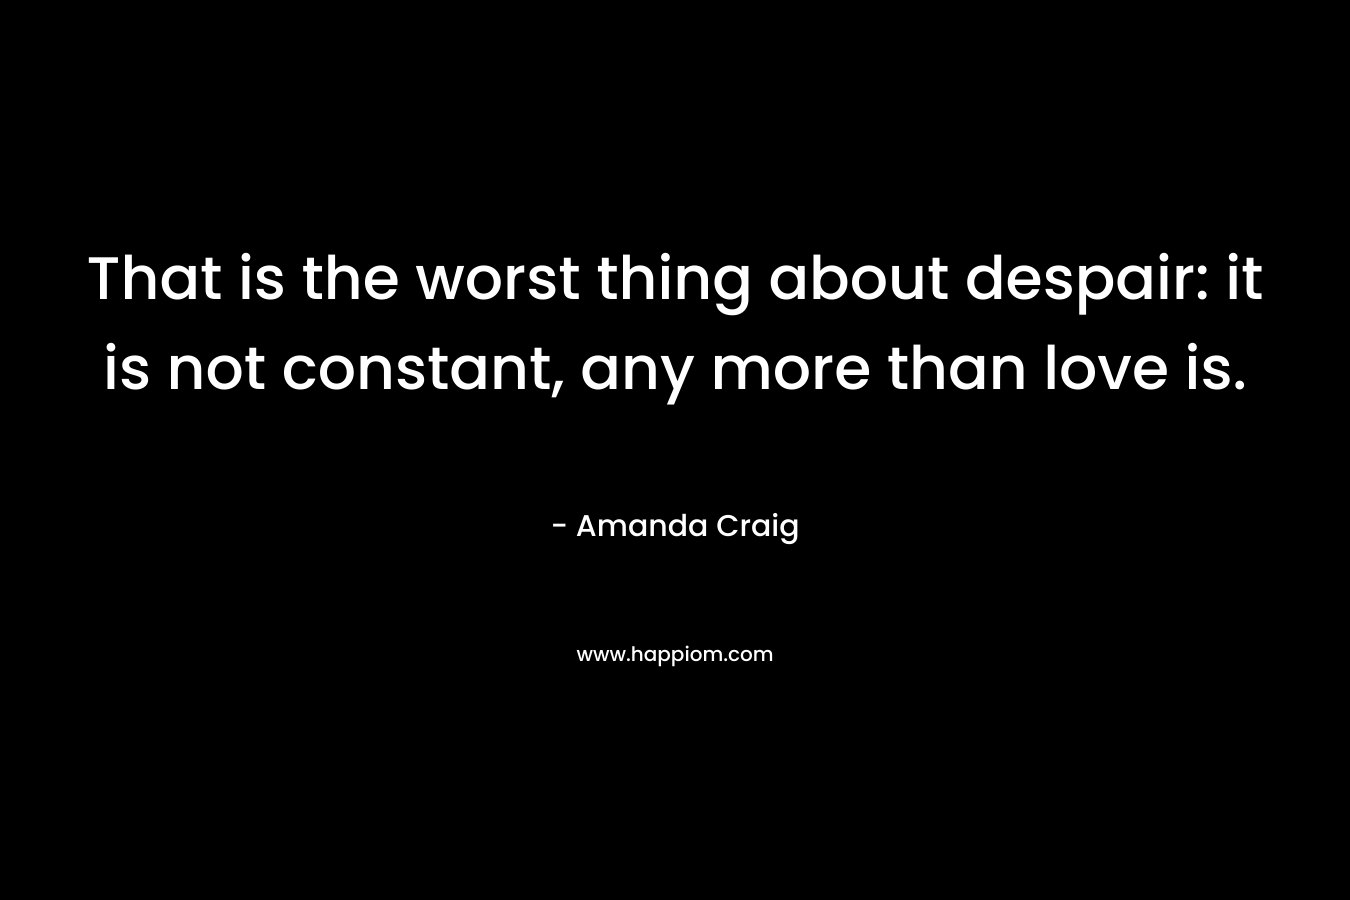 That is the worst thing about despair: it is not constant, any more than love is.